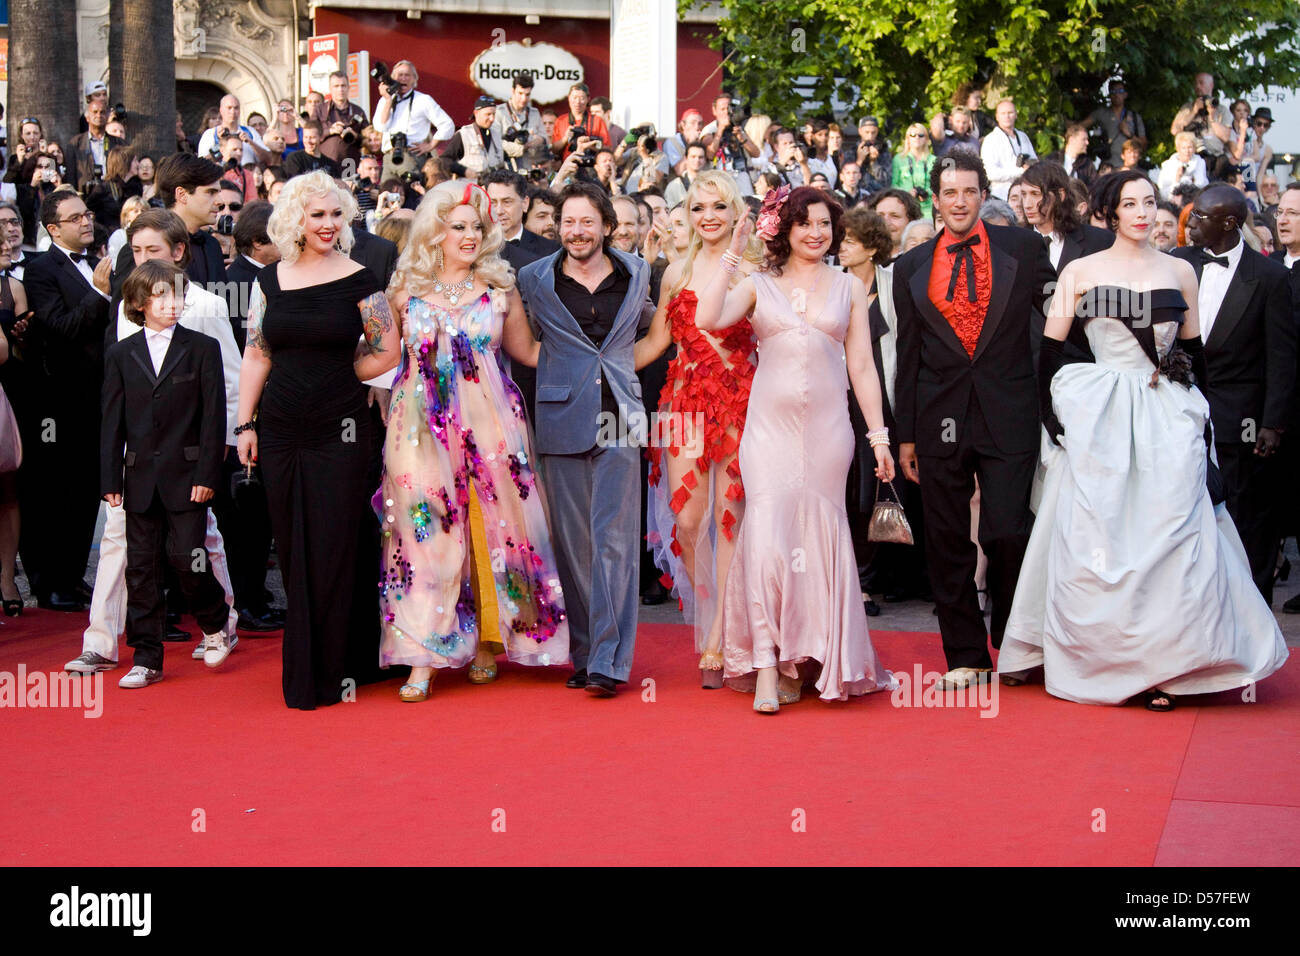 Mimmi Le Meaux (L-R), actress Dirty Martini, actor and director Mathieu Amalric, Julie Atlas Muz, actress Kitten on the Keys, actor Roky Roulette and actress Evie Lovelle attend the premiere of the movie 'Tournee' at the 63rd Cannes Film Festival at the Palais des Festivals in Cannes, France, 13 May 2010. The Cannes Film Festival 2010 runs from 12 to 23 May 2010. Photo: Hubert Boes Stock Photo